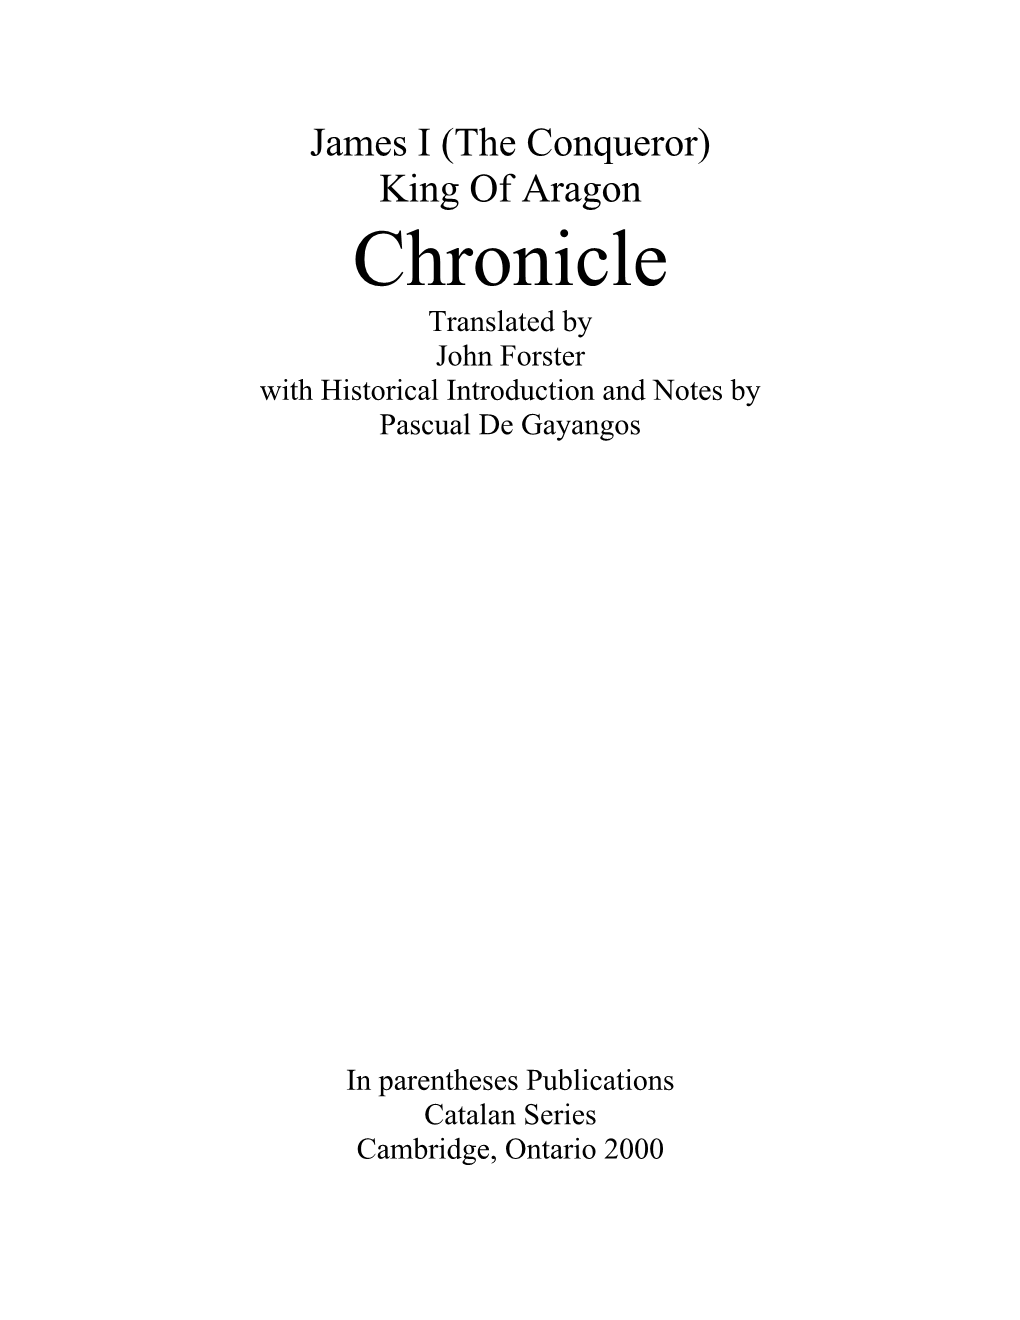 Chronicle Translated by John Forster with Historical Introduction and Notes by Pascual De Gayangos